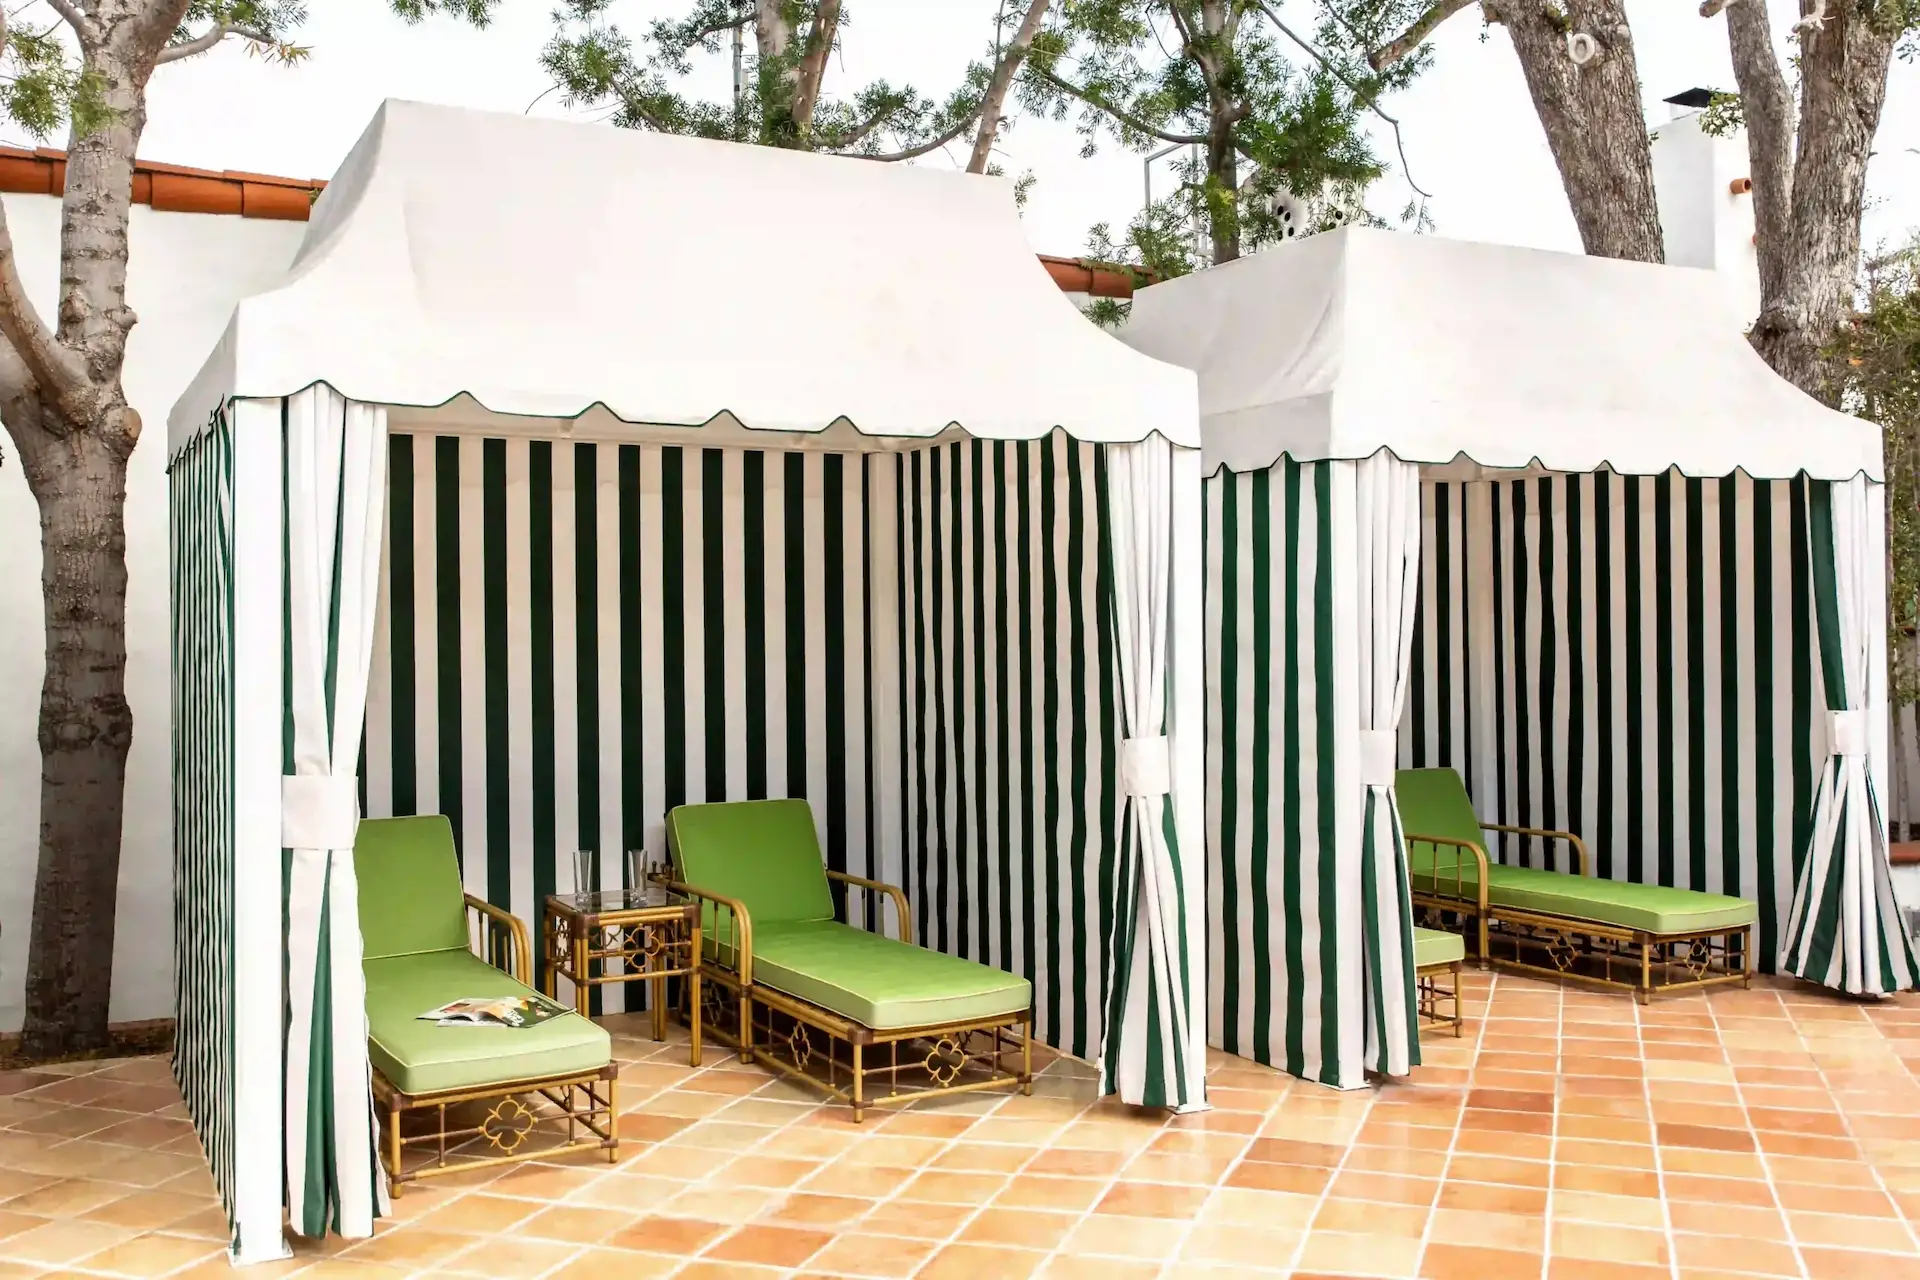 Spa relaxation area with cabanas and hammocks